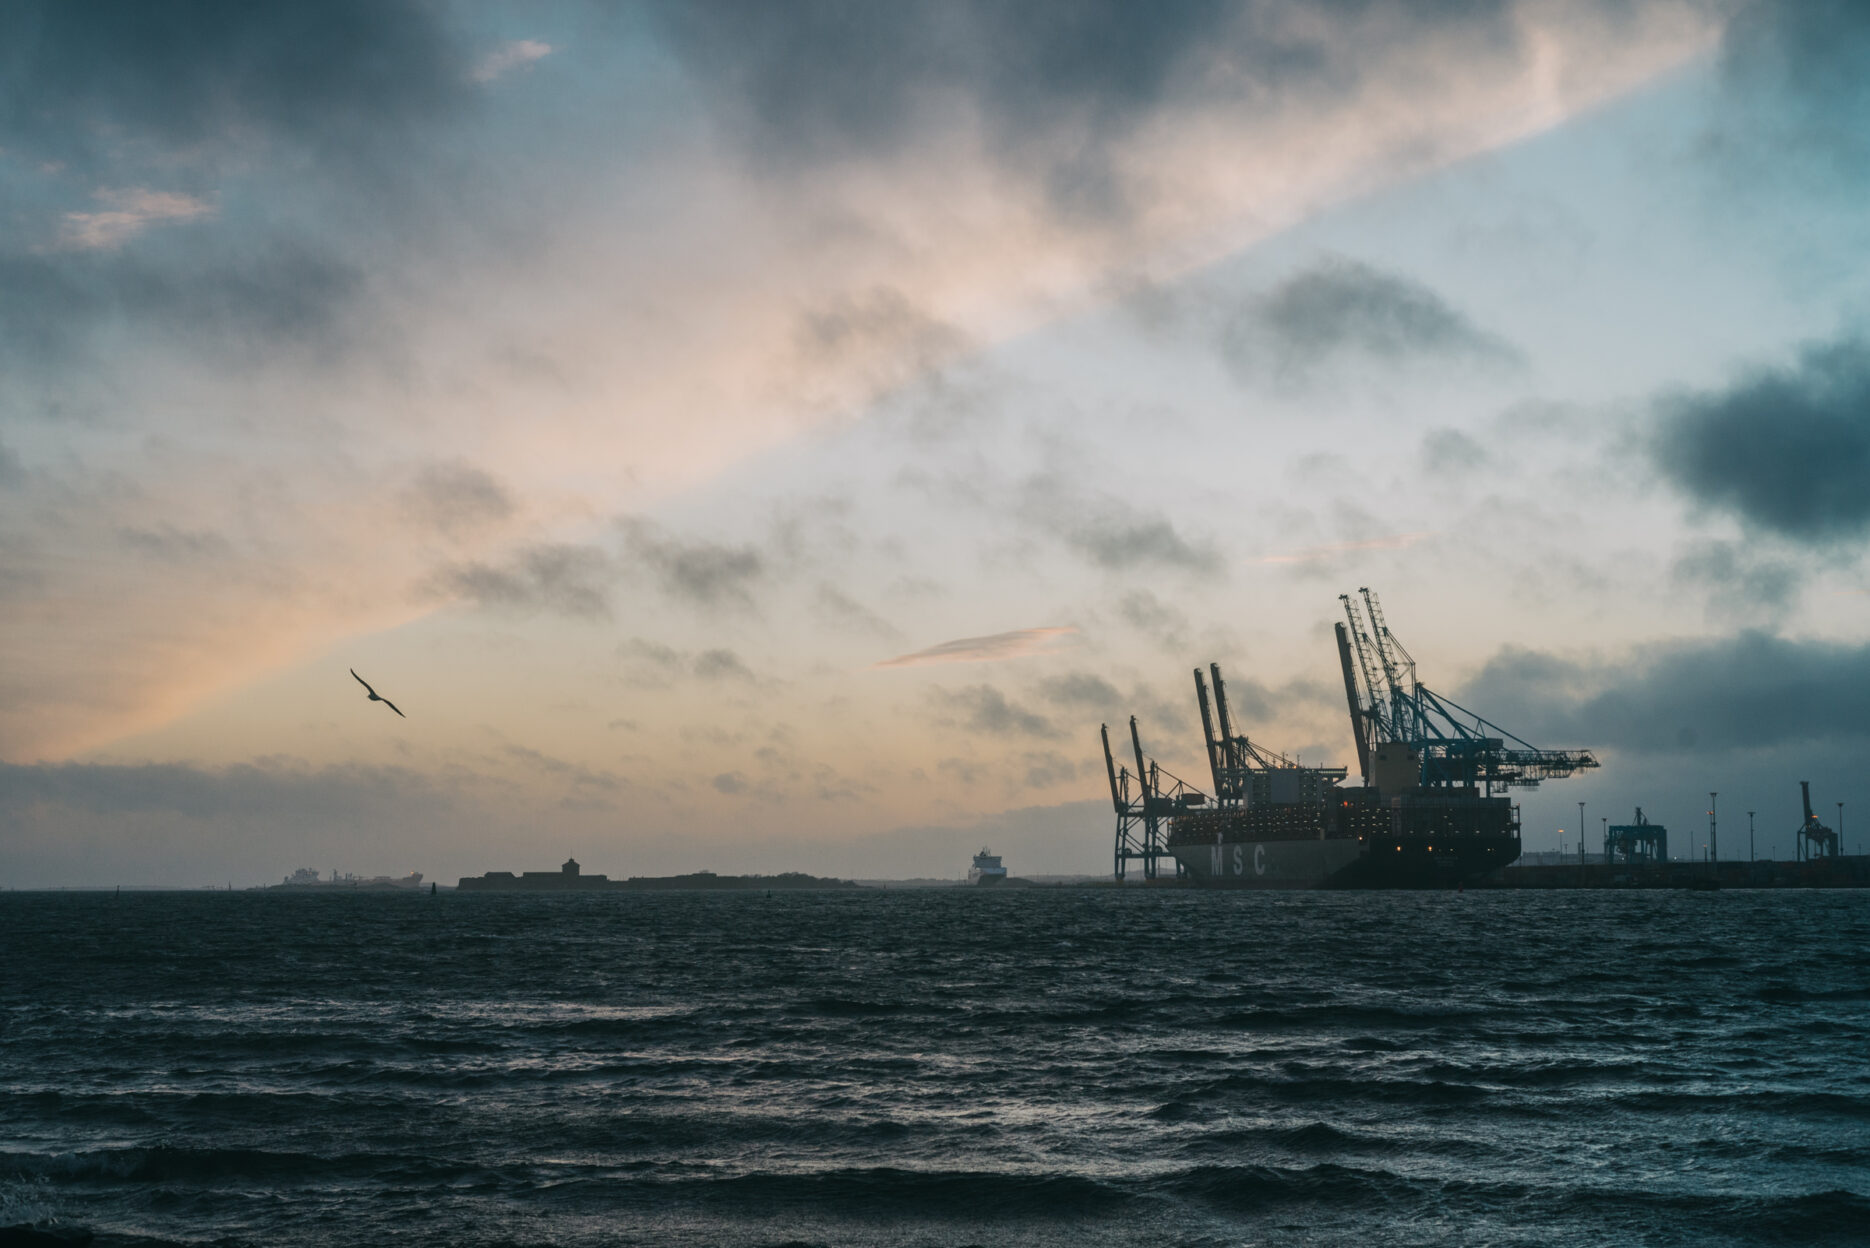 Dark water and large industrial cranes against a cloudy sky.